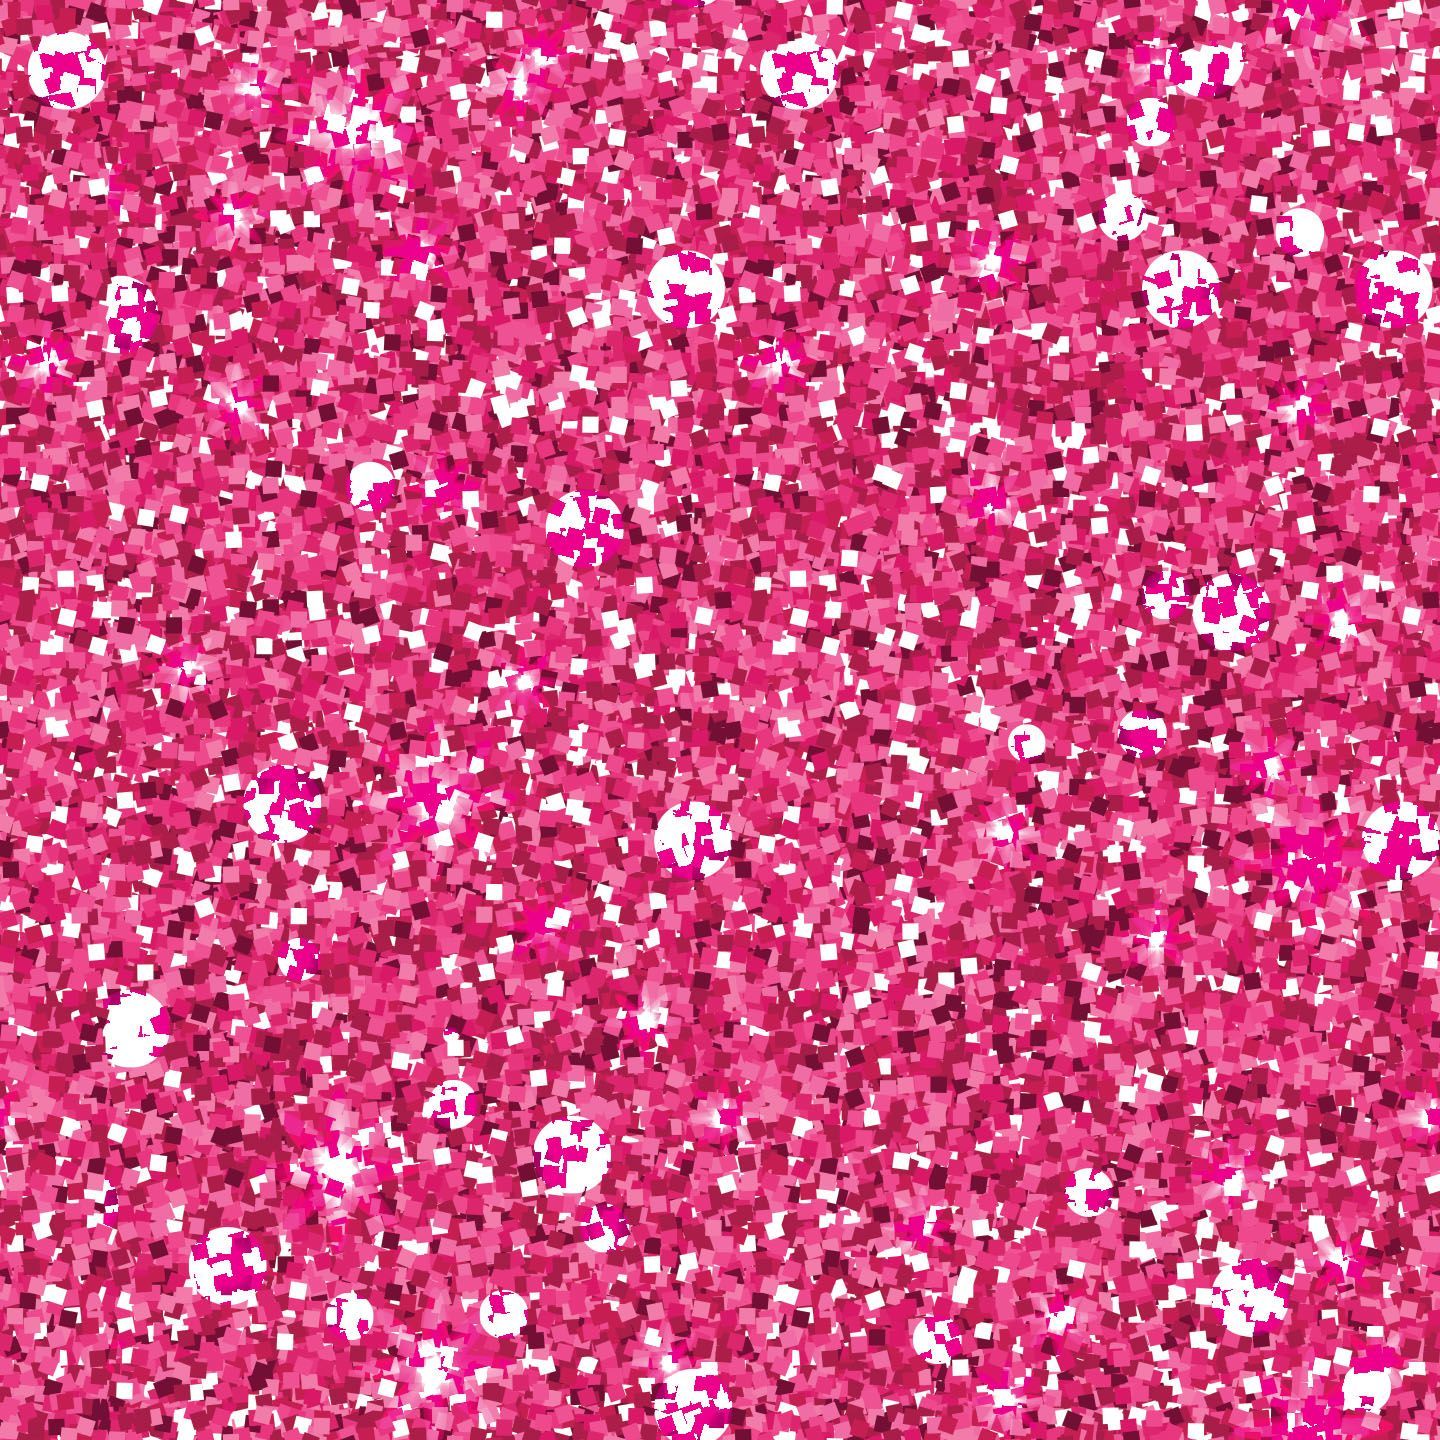 Doll House Glitter Pattern Wallpaper And Stick Or Non Pasted